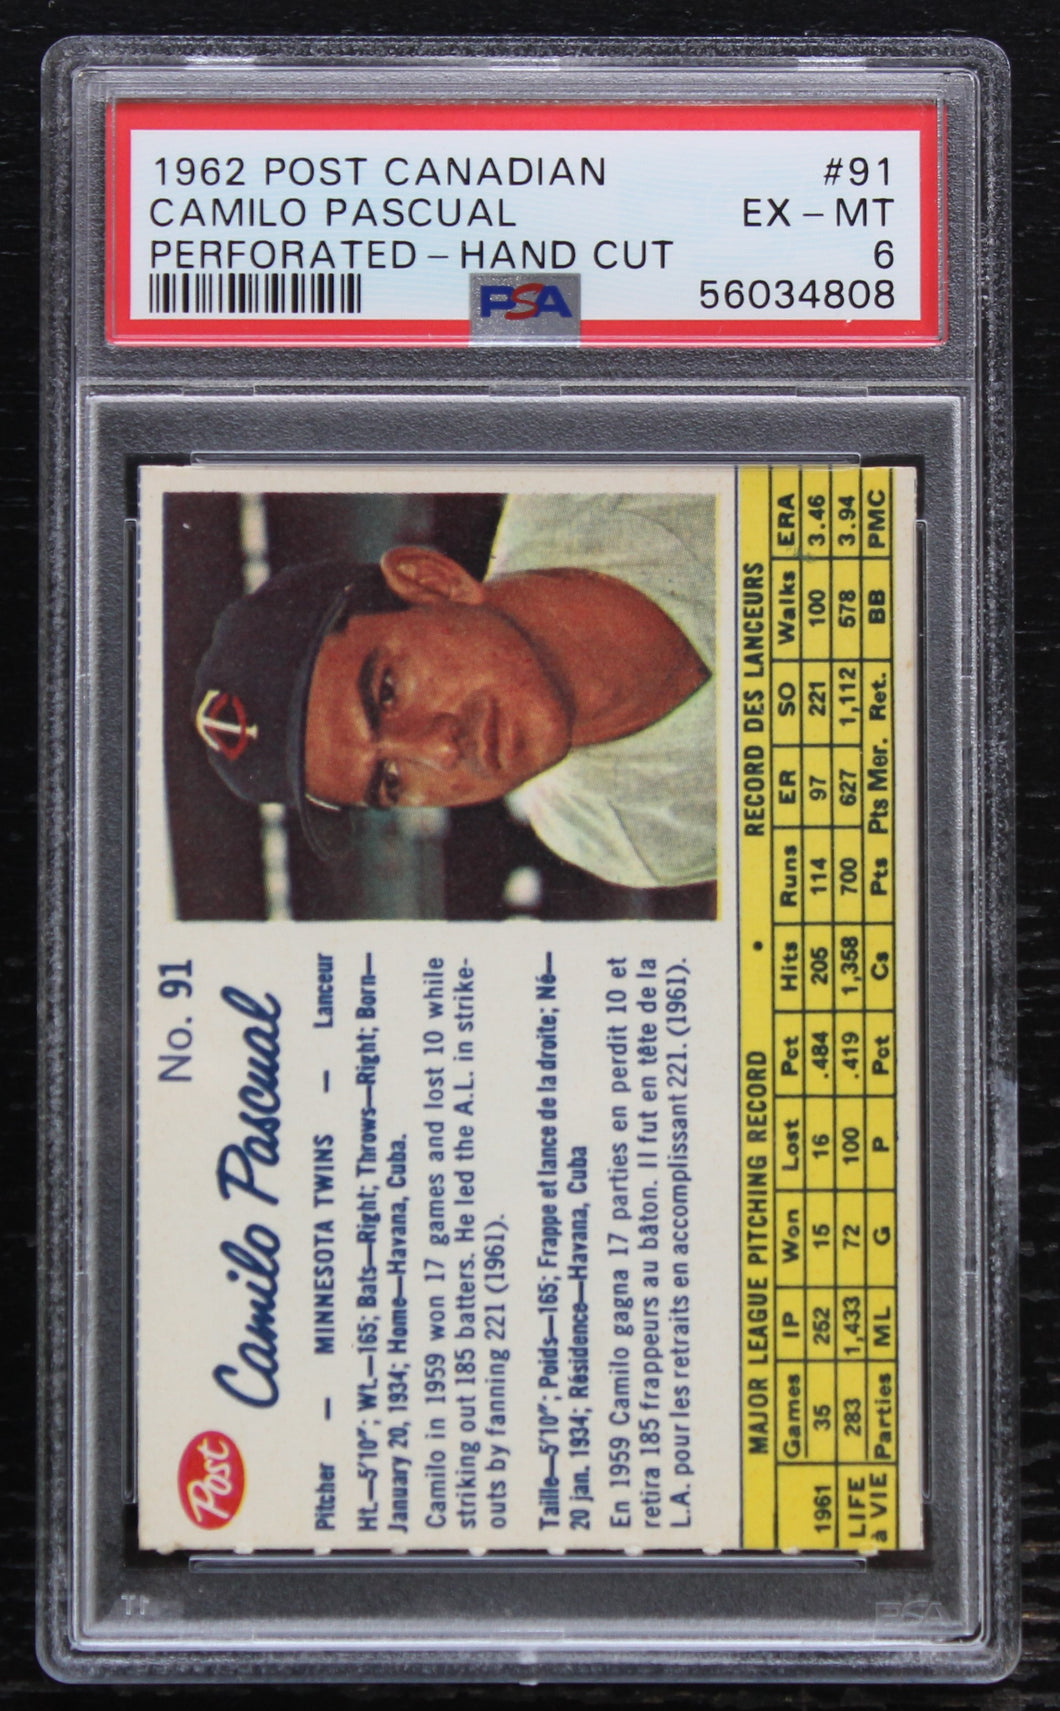 1962 Post Canadian Camilo Pascual Perforated - Hand Cut #91 PSA EX-MT 6